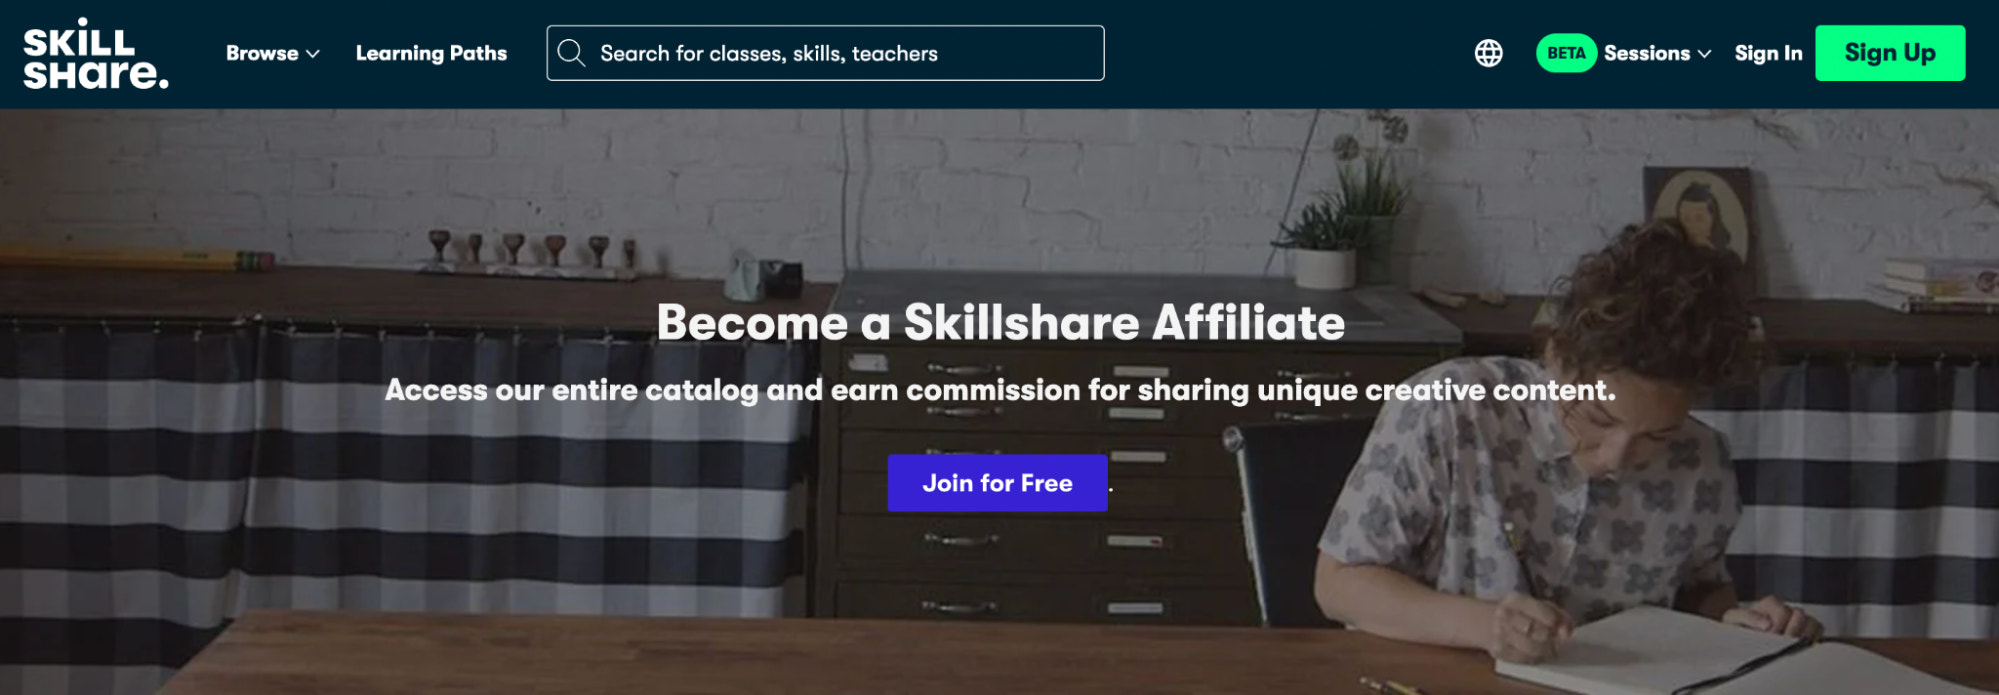 Screenshot of Skillshare’s website that shows a woman writing in a notepad behind the text “Become a Skillshare affiliate”.